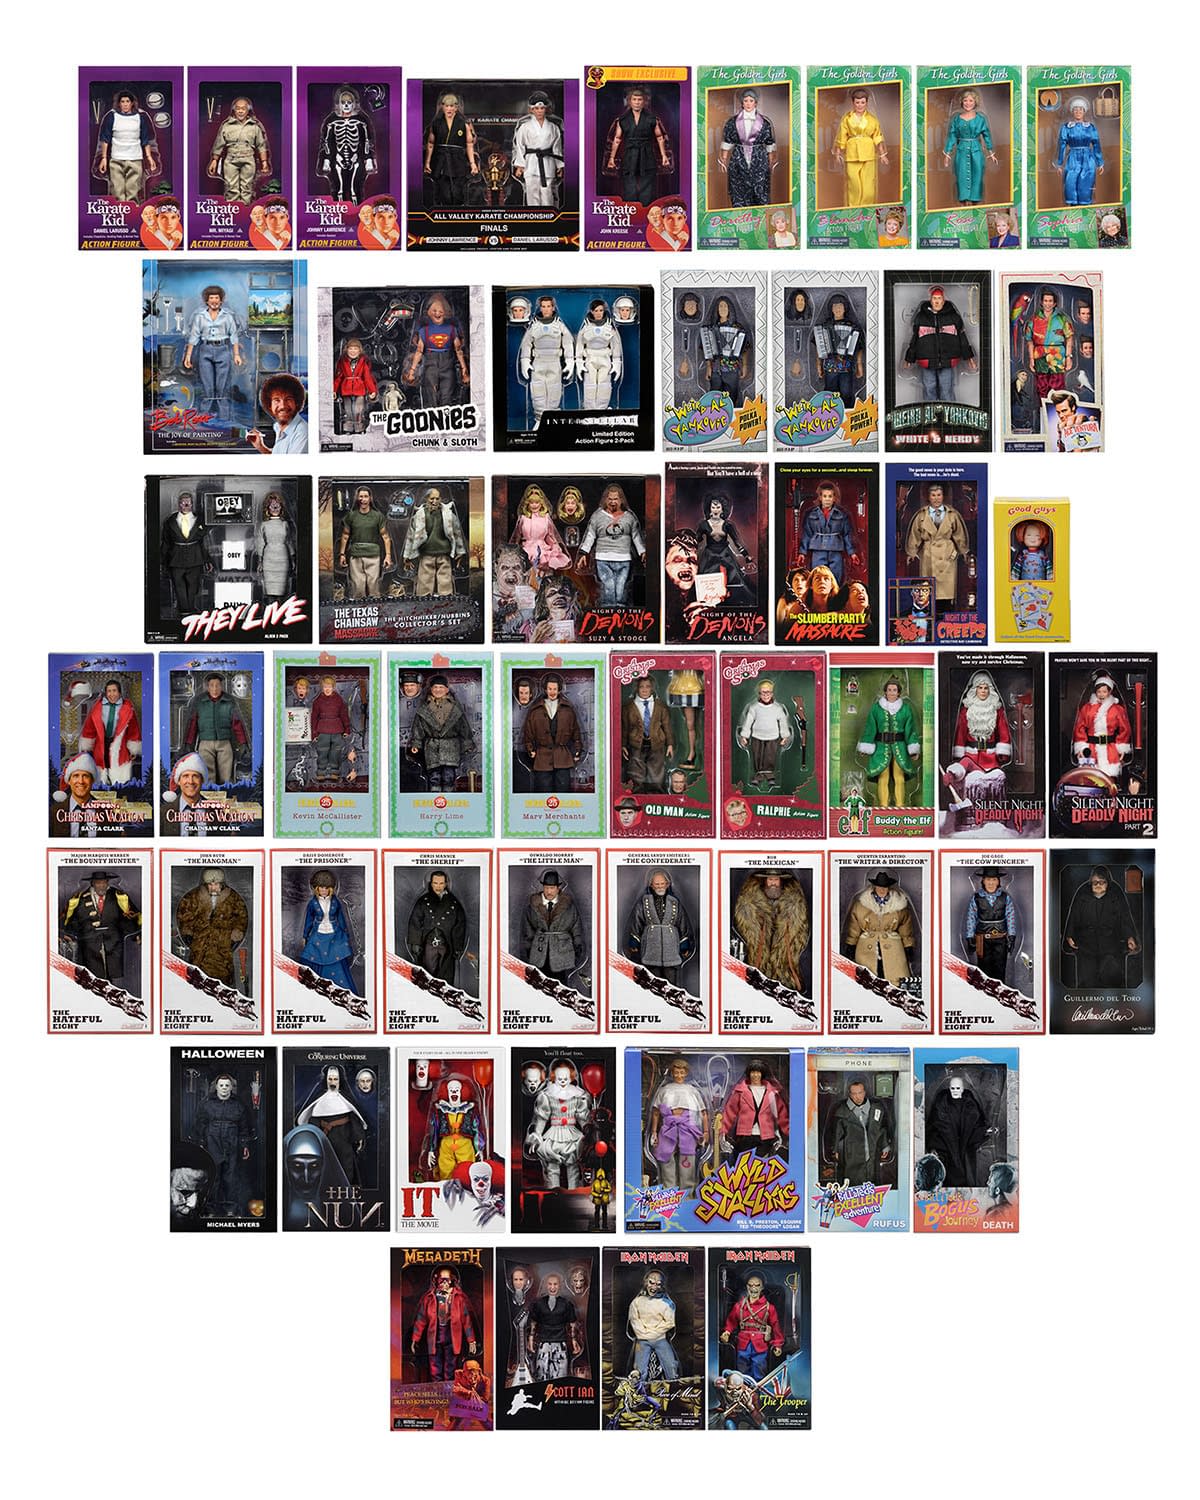 NECA Gives Us Visual Guides with 5 Days of Downloads